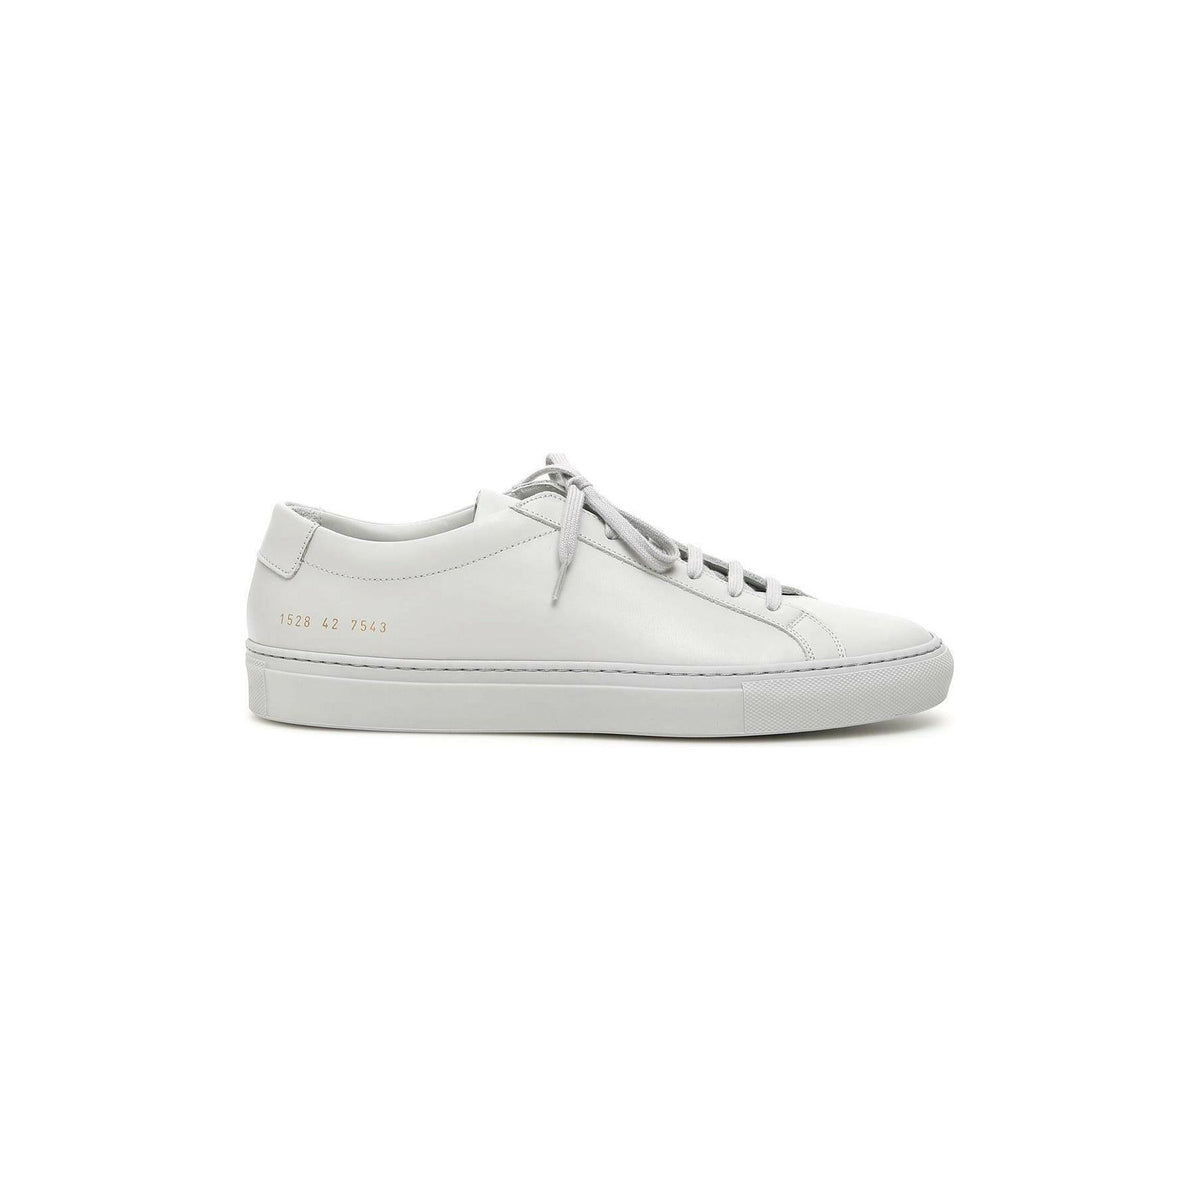 Grey Original Achilles Low-Top Leather Sneakers COMMON PROJECTS JOHN JULIA.